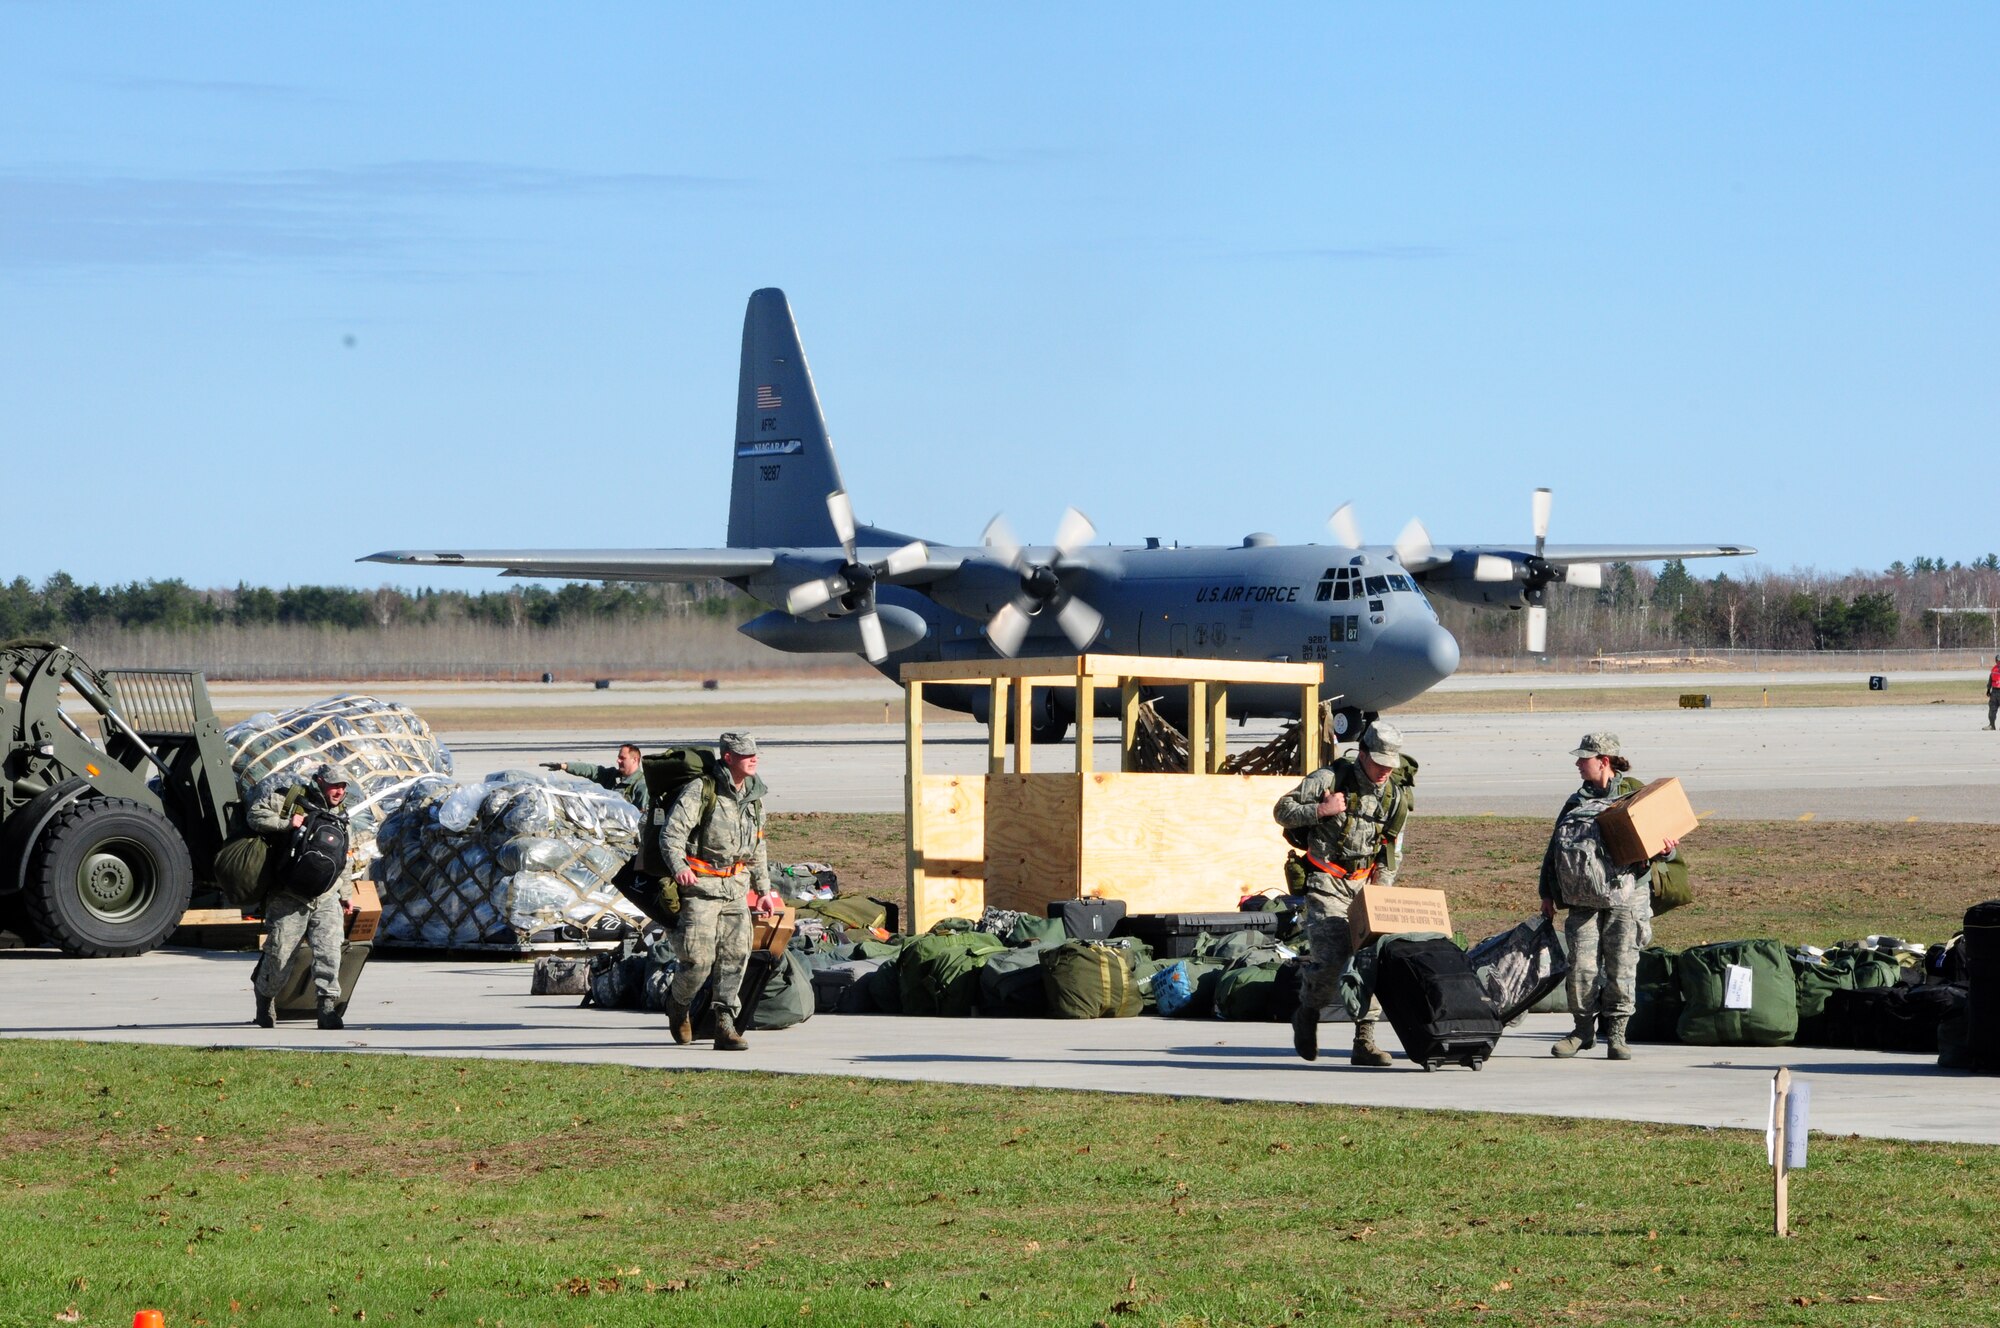 Airmen collect baggage shortly after arriving at Alpena, Michigan Combat Readiness Training Center and prepare for a training exercise.  Exercises such as these ensure Airmen are current, qualified, and ready to fight. (U.S. Air Force photo by Senior Airman Jessica Mae Snow)